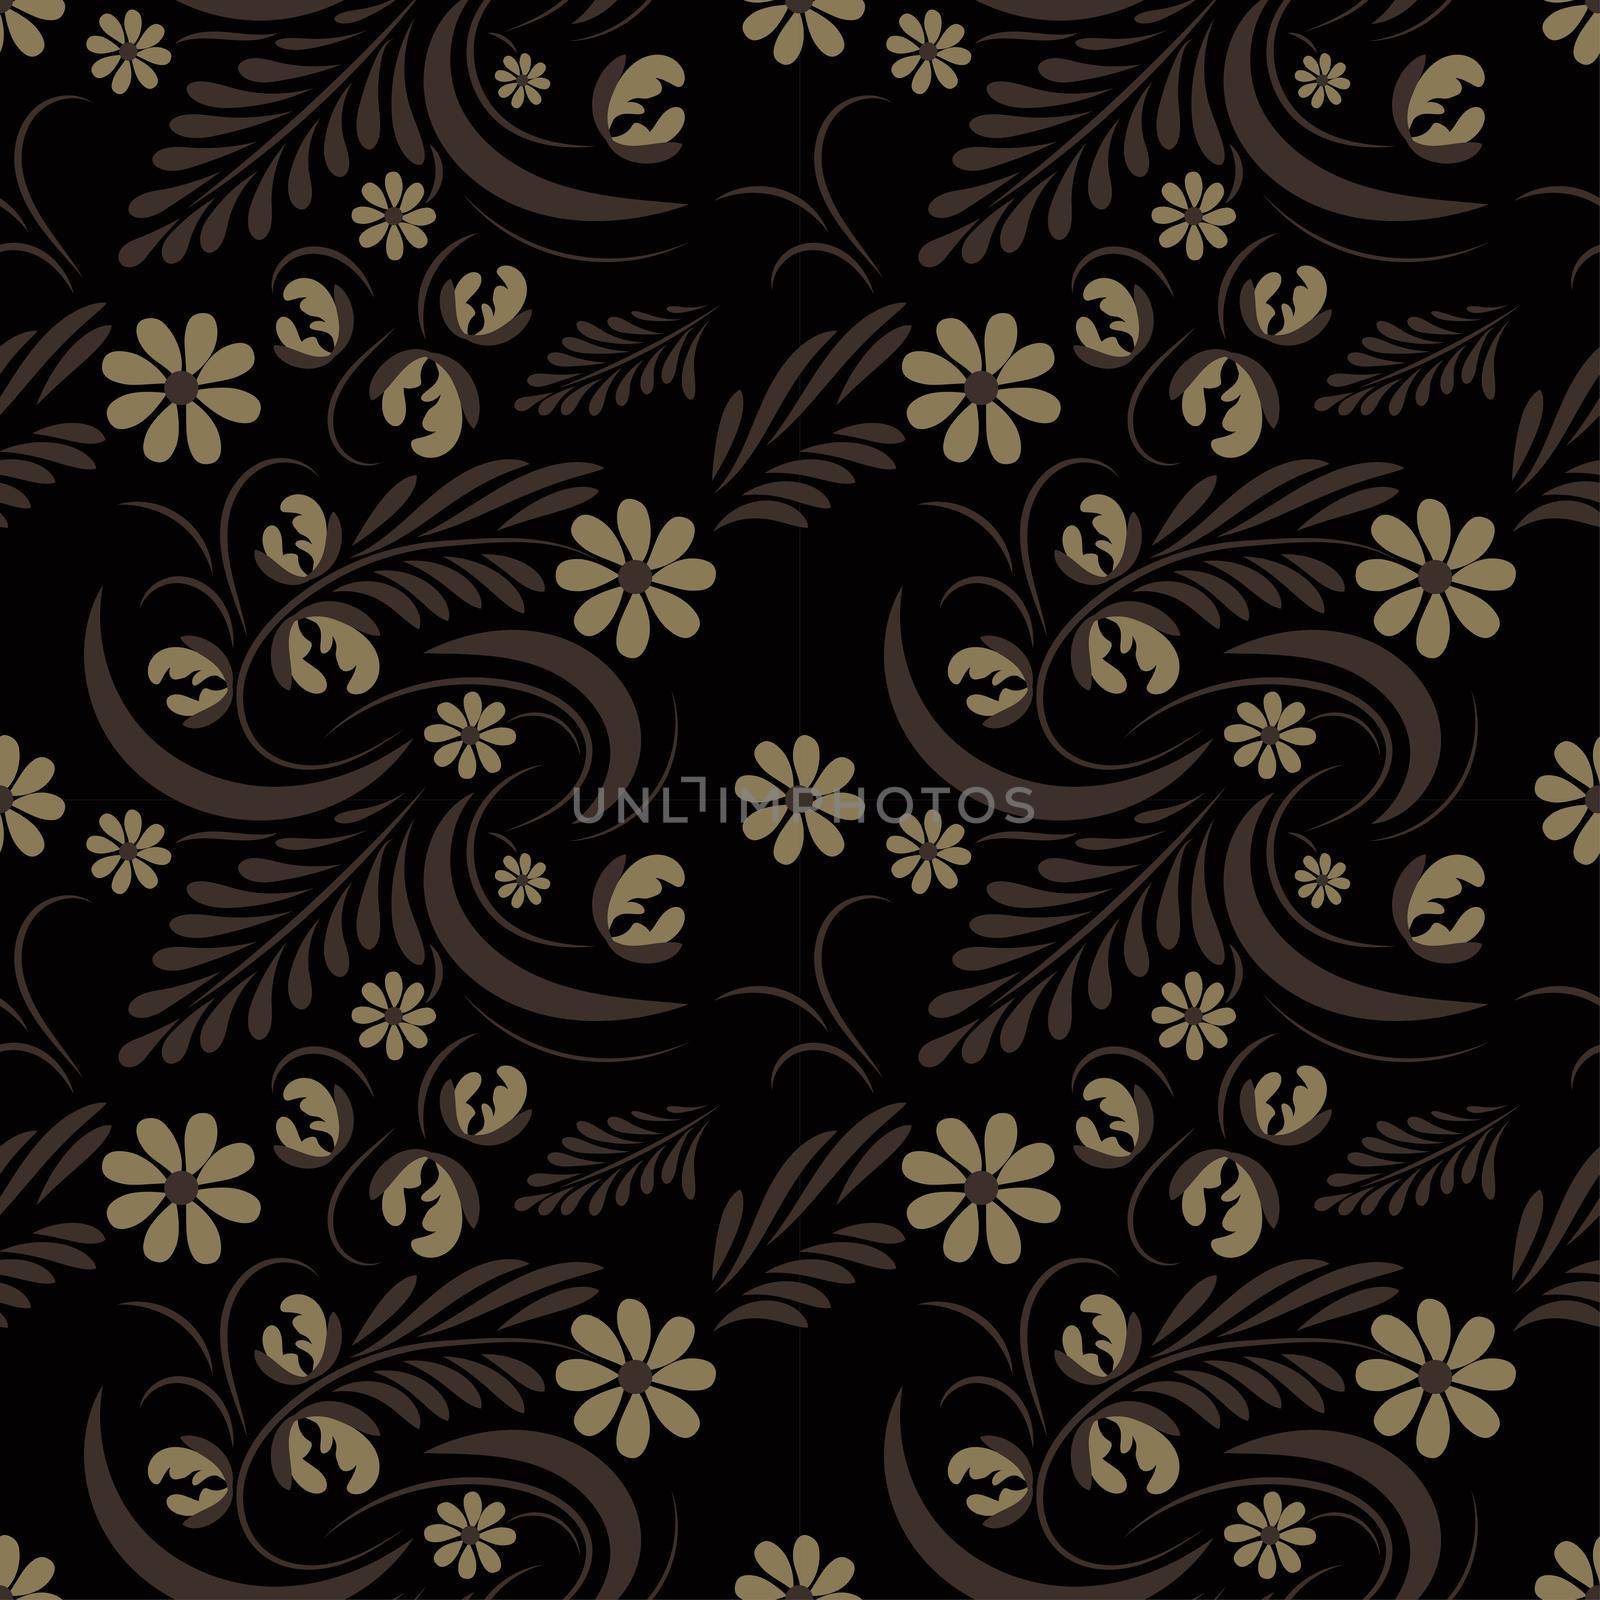 Floral pattern with flowers and leaves Fantasy flowers Abstract Floral geometric fantasy